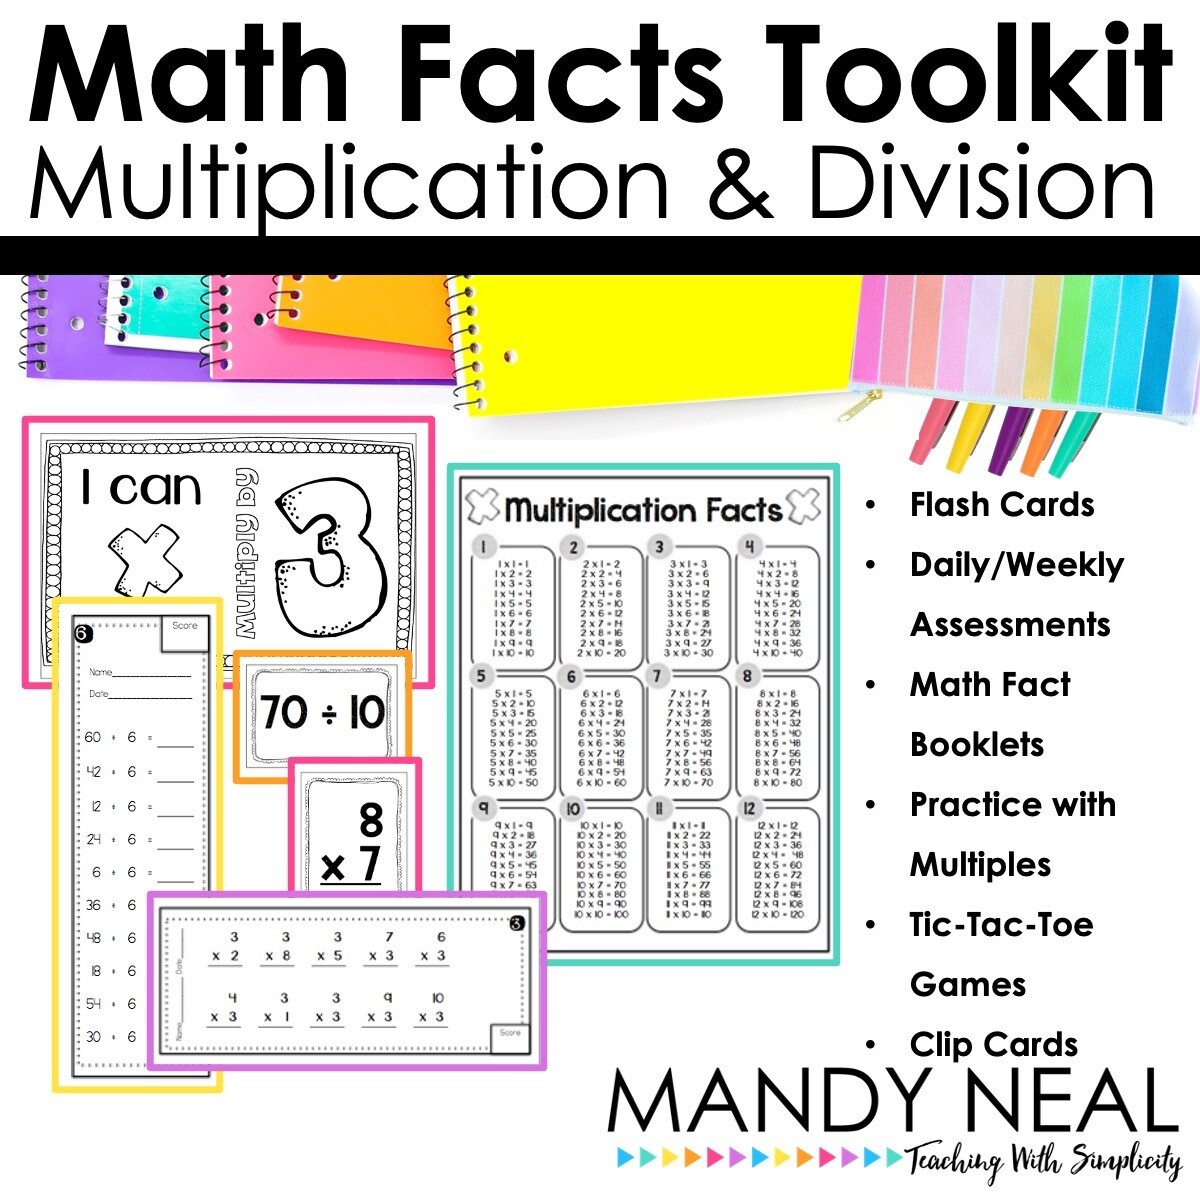 Multiplication & Division Facts Toolkit